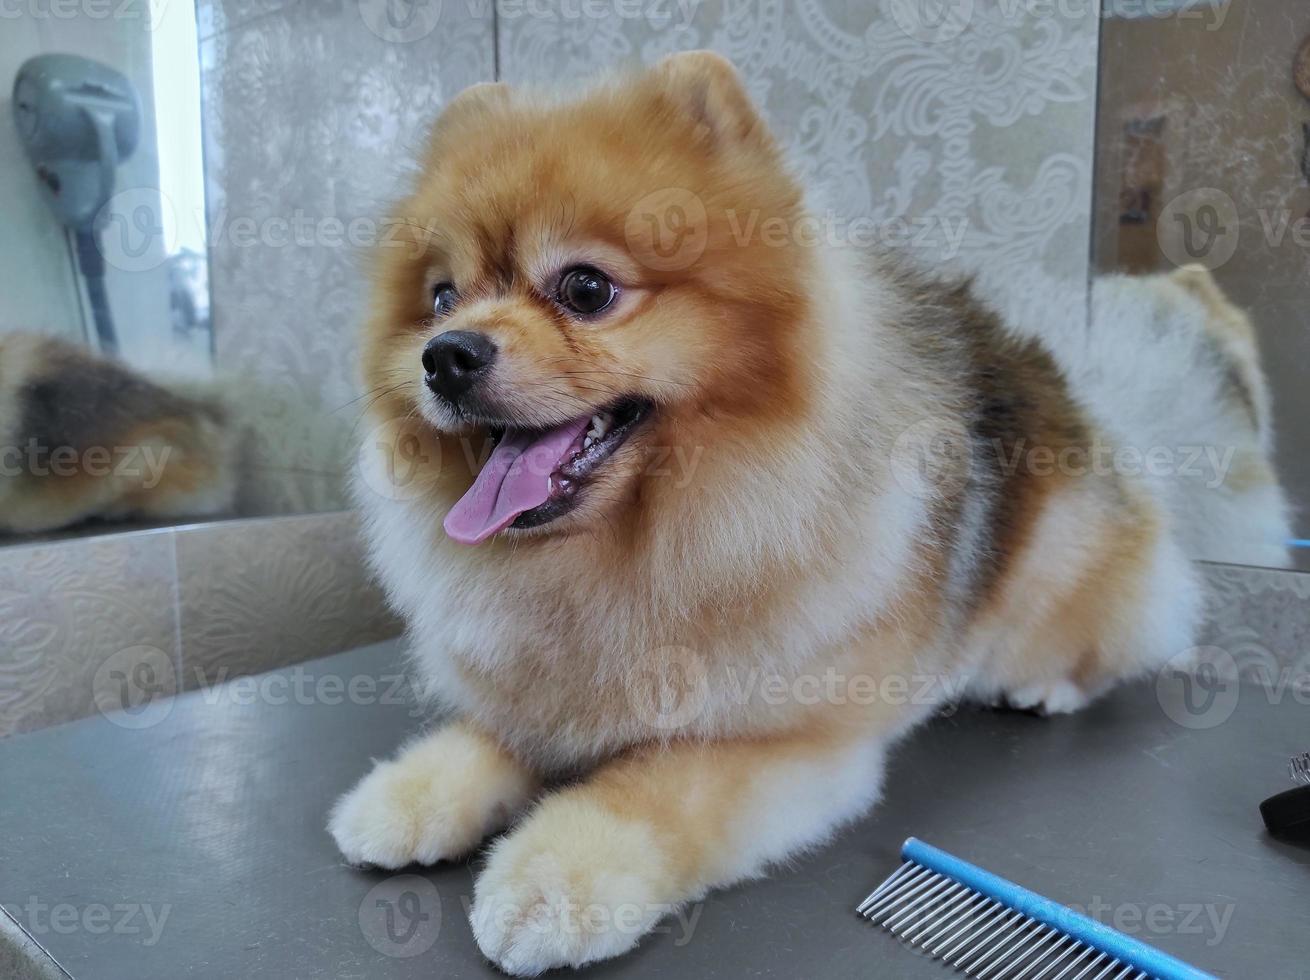 A Spitz dog on a groomer's table after a haircut. beautiful little dog photo